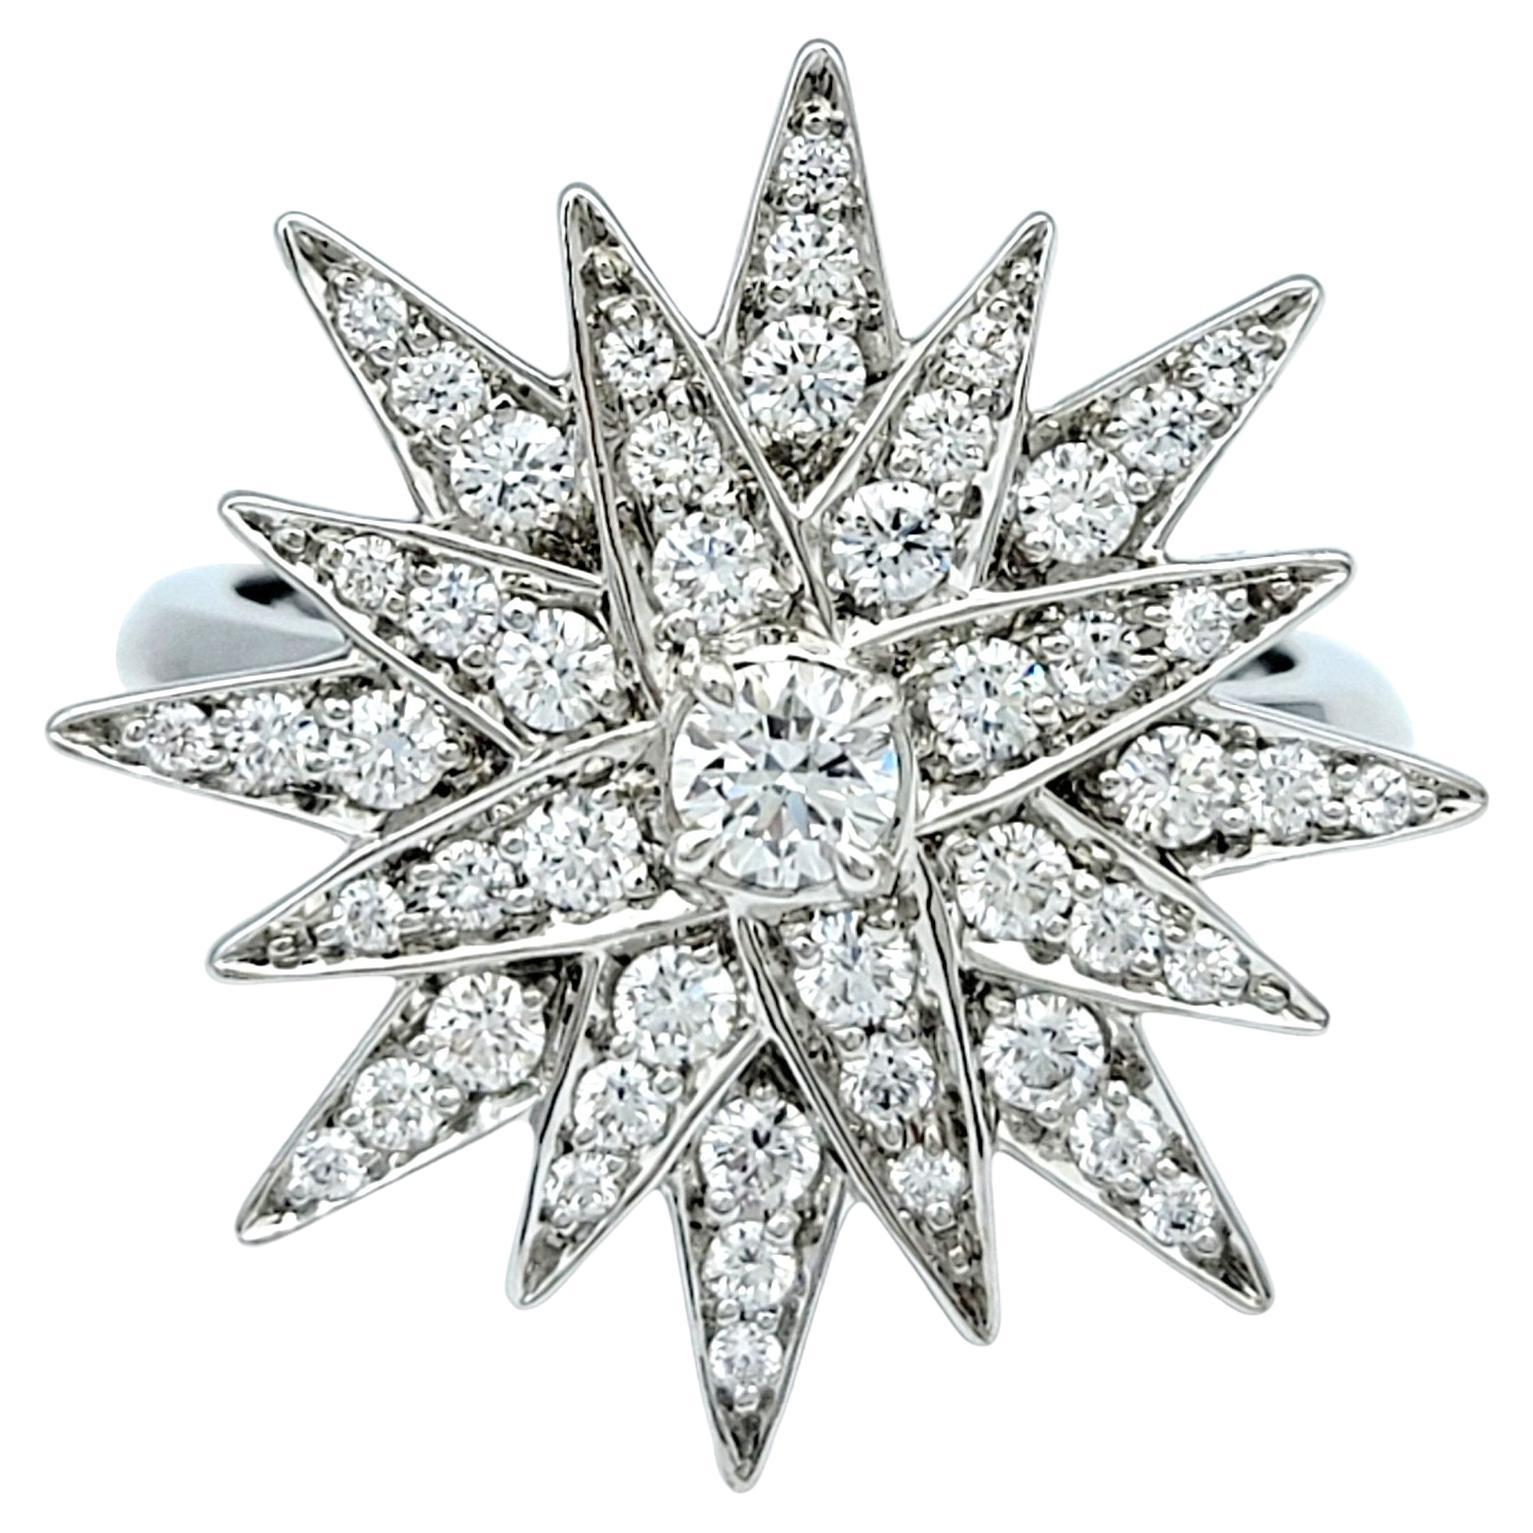 Kat Florence D Color Flawless Round Diamond Starburst Ring, 18 Karat White Gold In Excellent Condition For Sale In Scottsdale, AZ